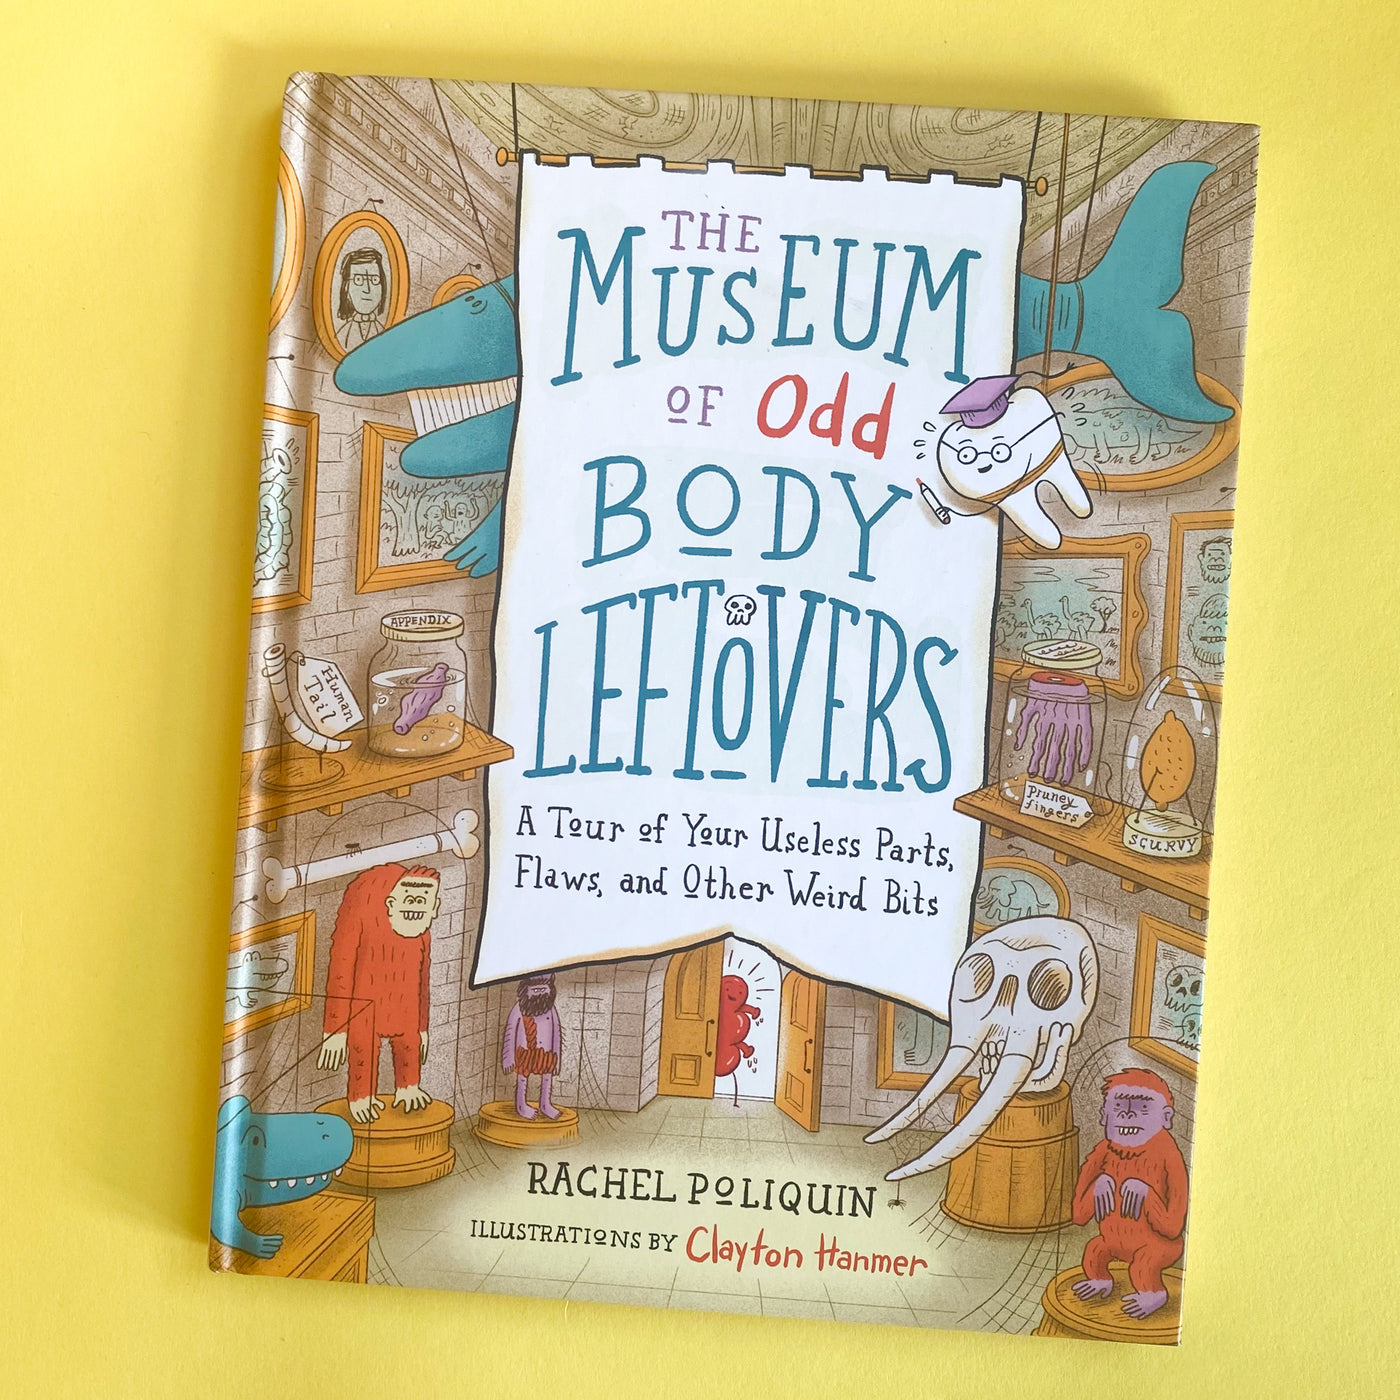 The Museum of Odd Body Leftovers: A Tour of Your Useless Parts, Flaws, and Other Weird Bits by Rachel Poliquin and Clayton Hanmer